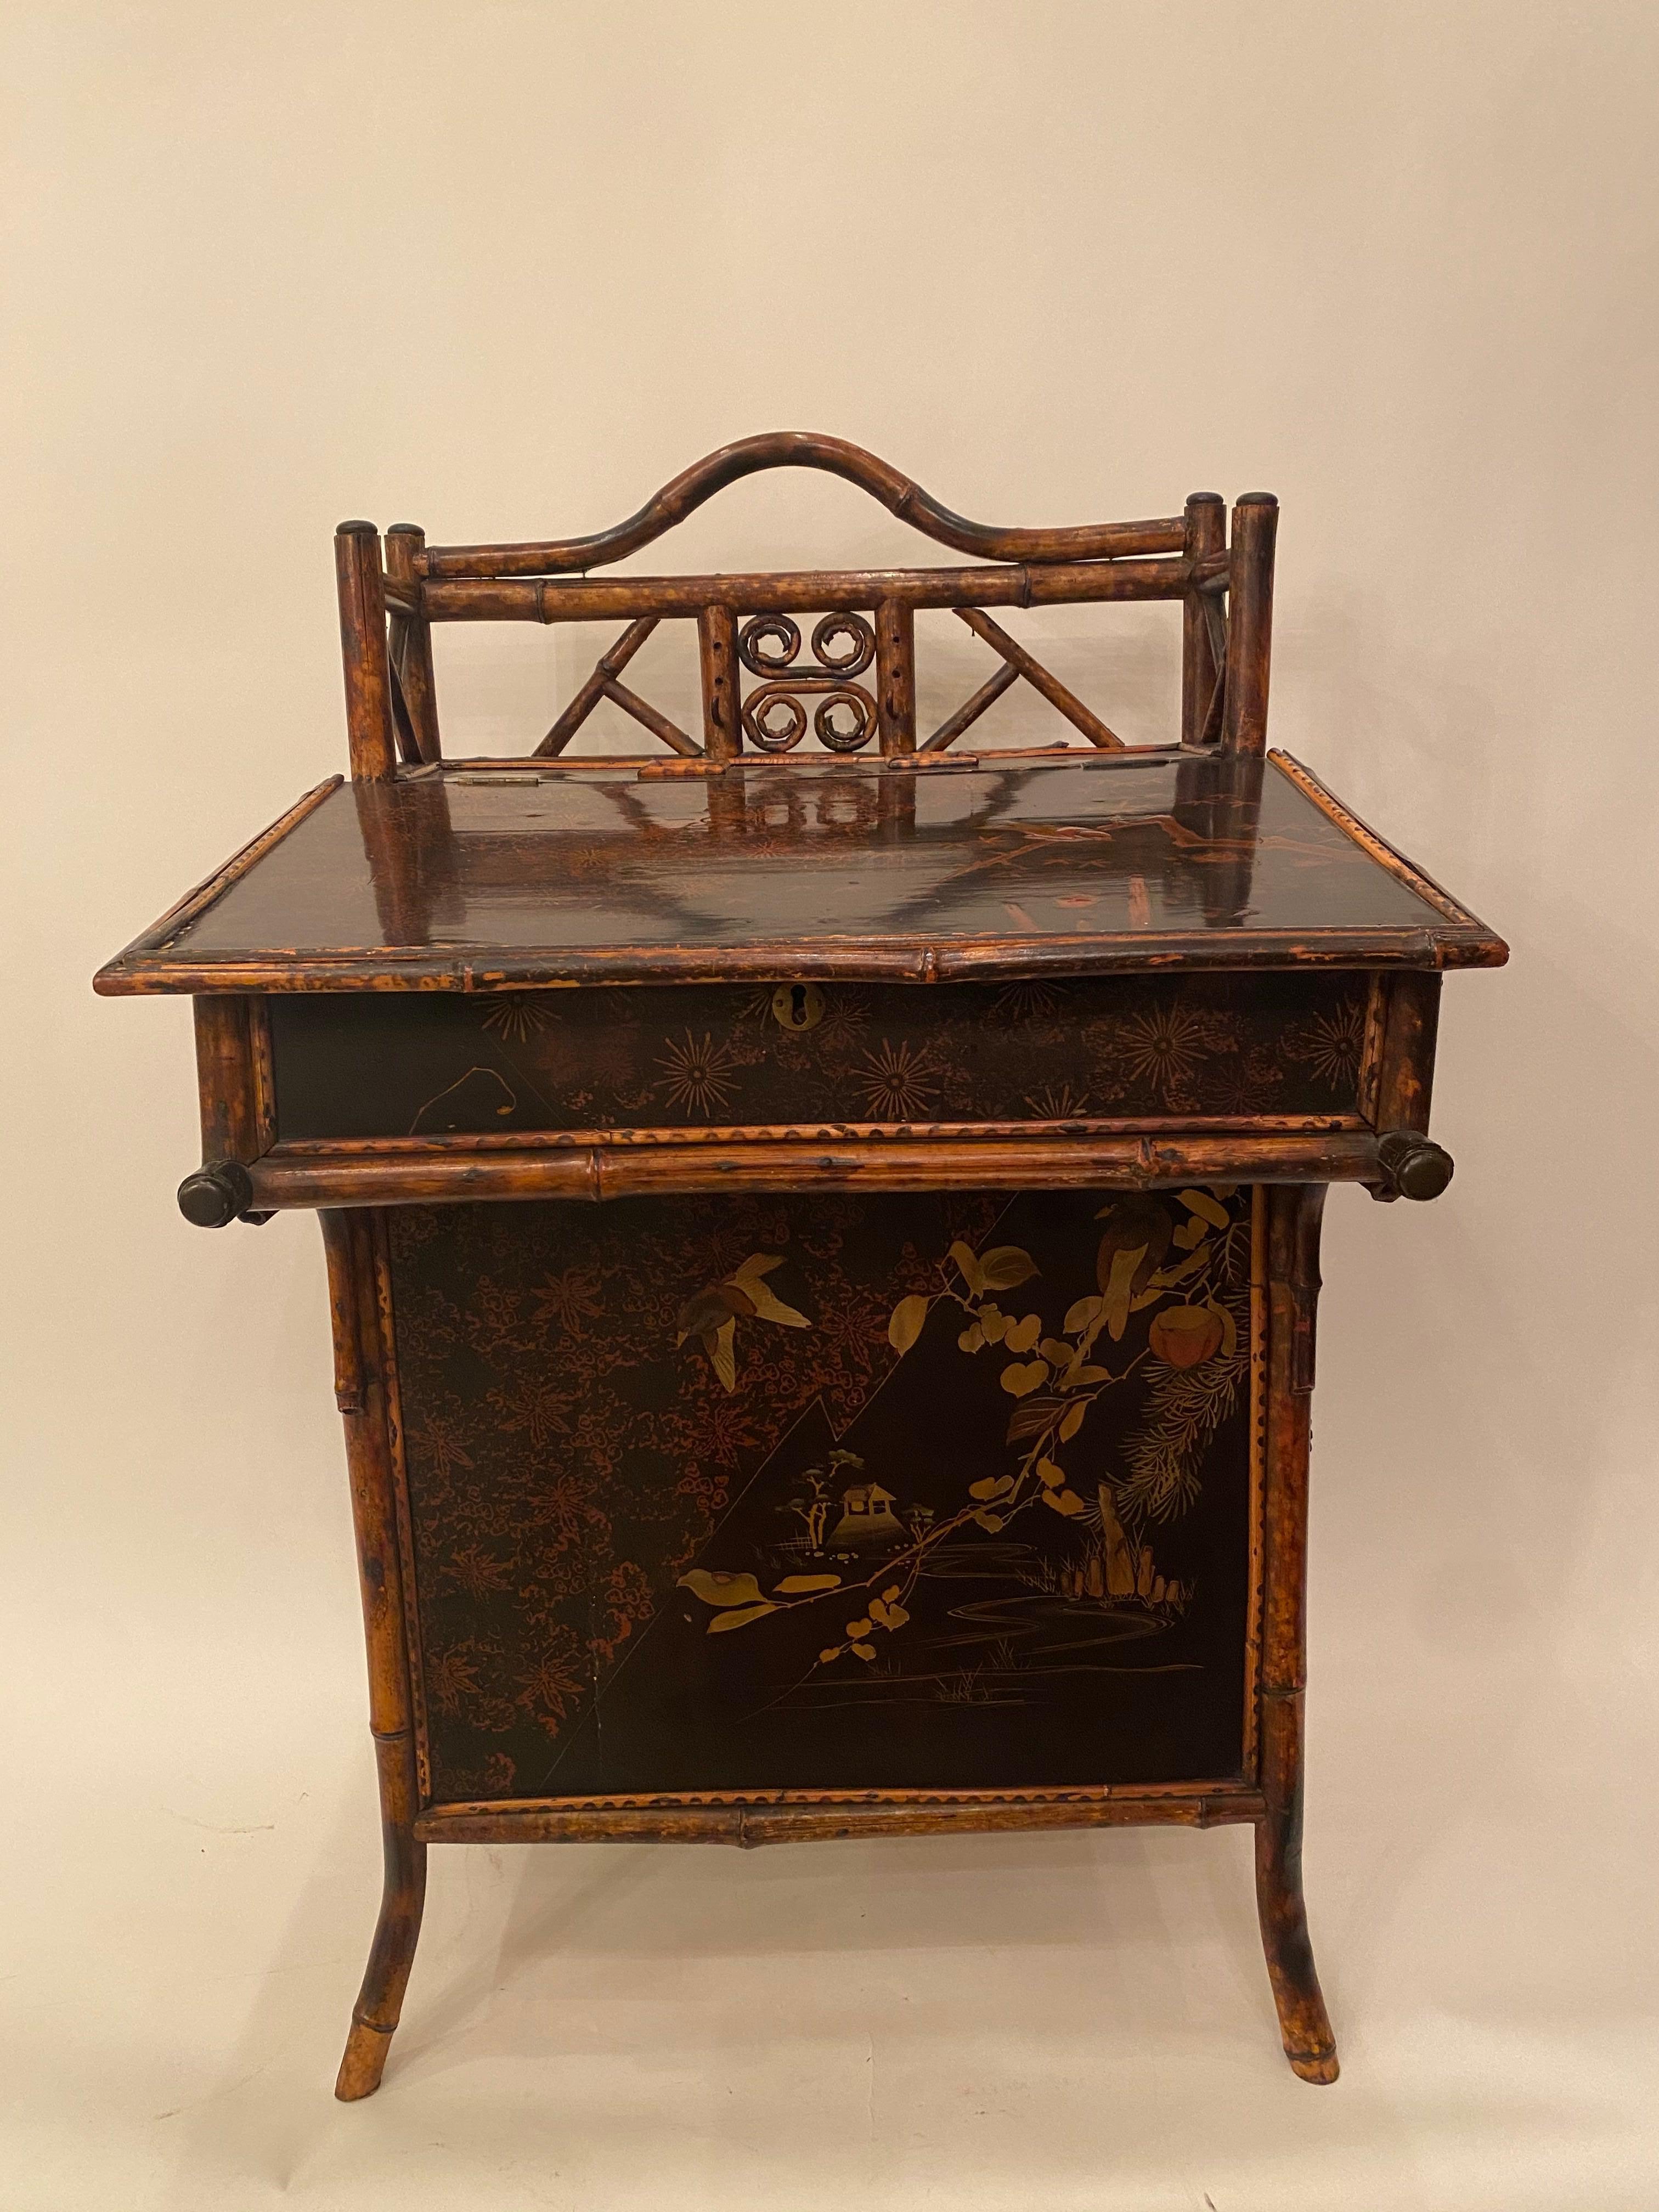 Lacquered Late Meiji Period Japanese Export Lacquer Bamboo Desk, circa 1900s